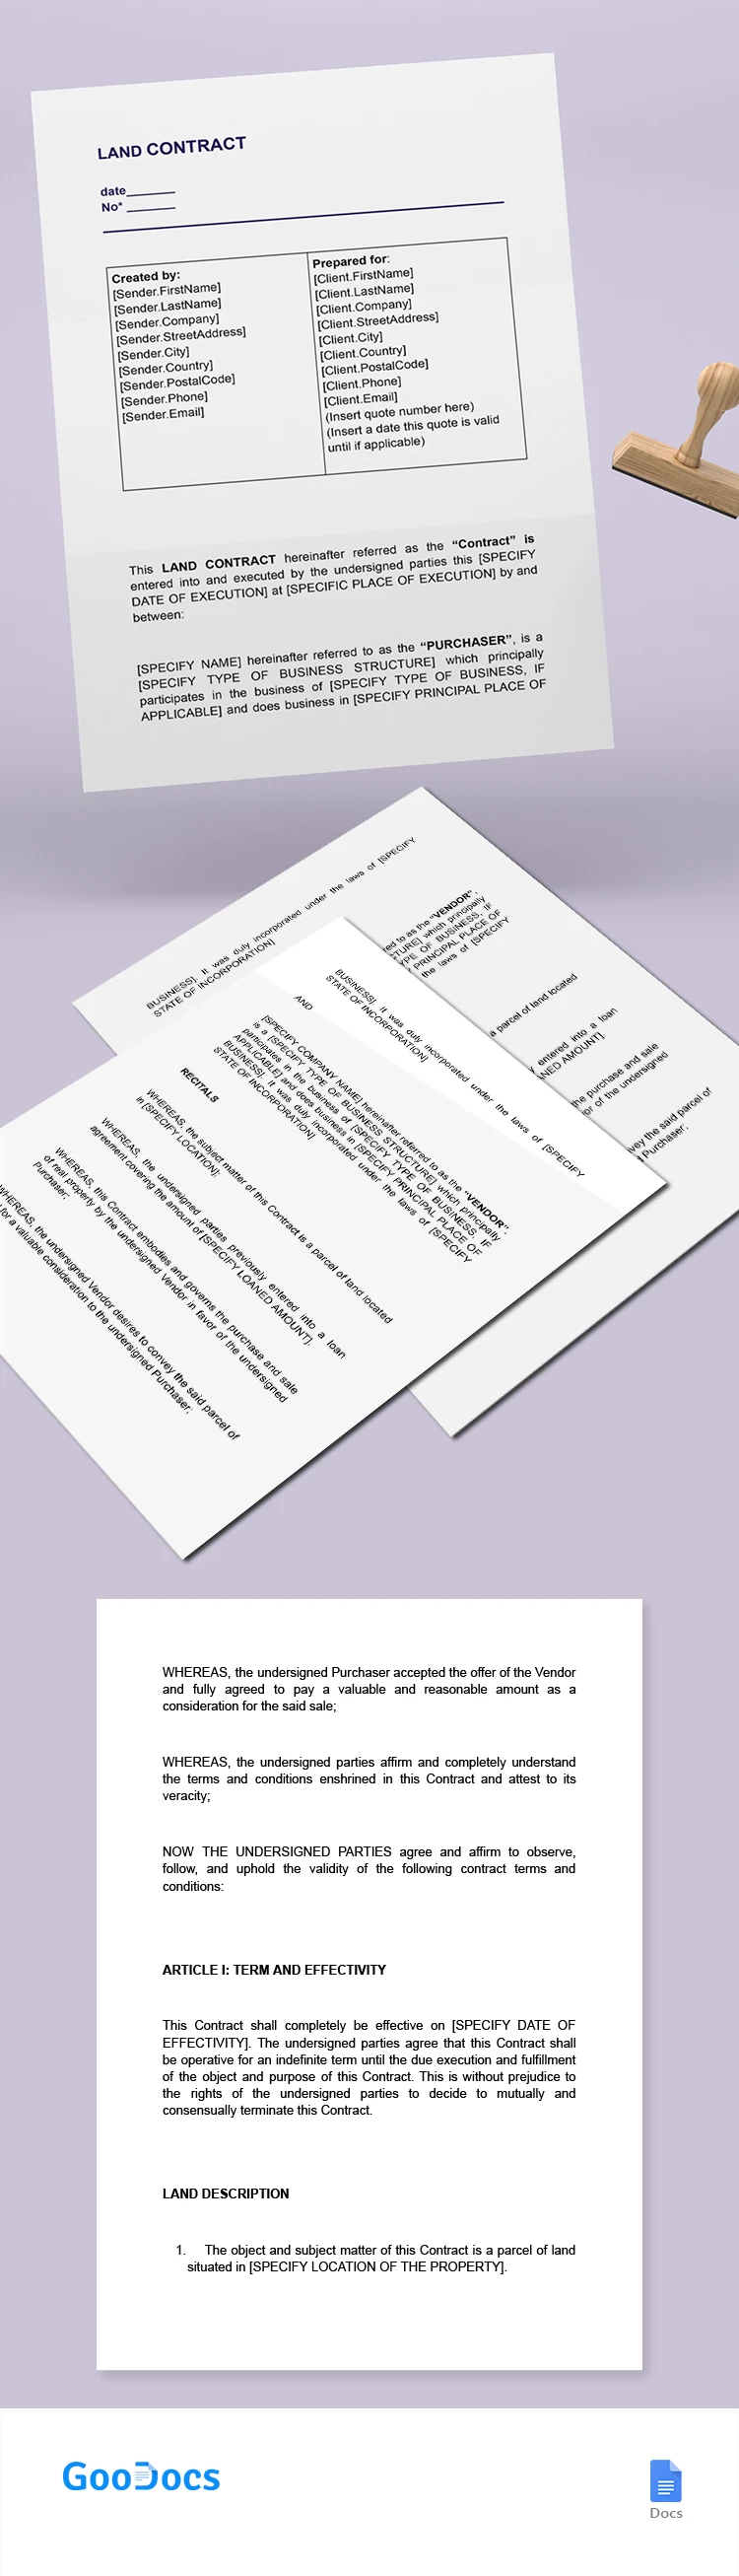 Land Contract - free Google Docs Template - 10065544